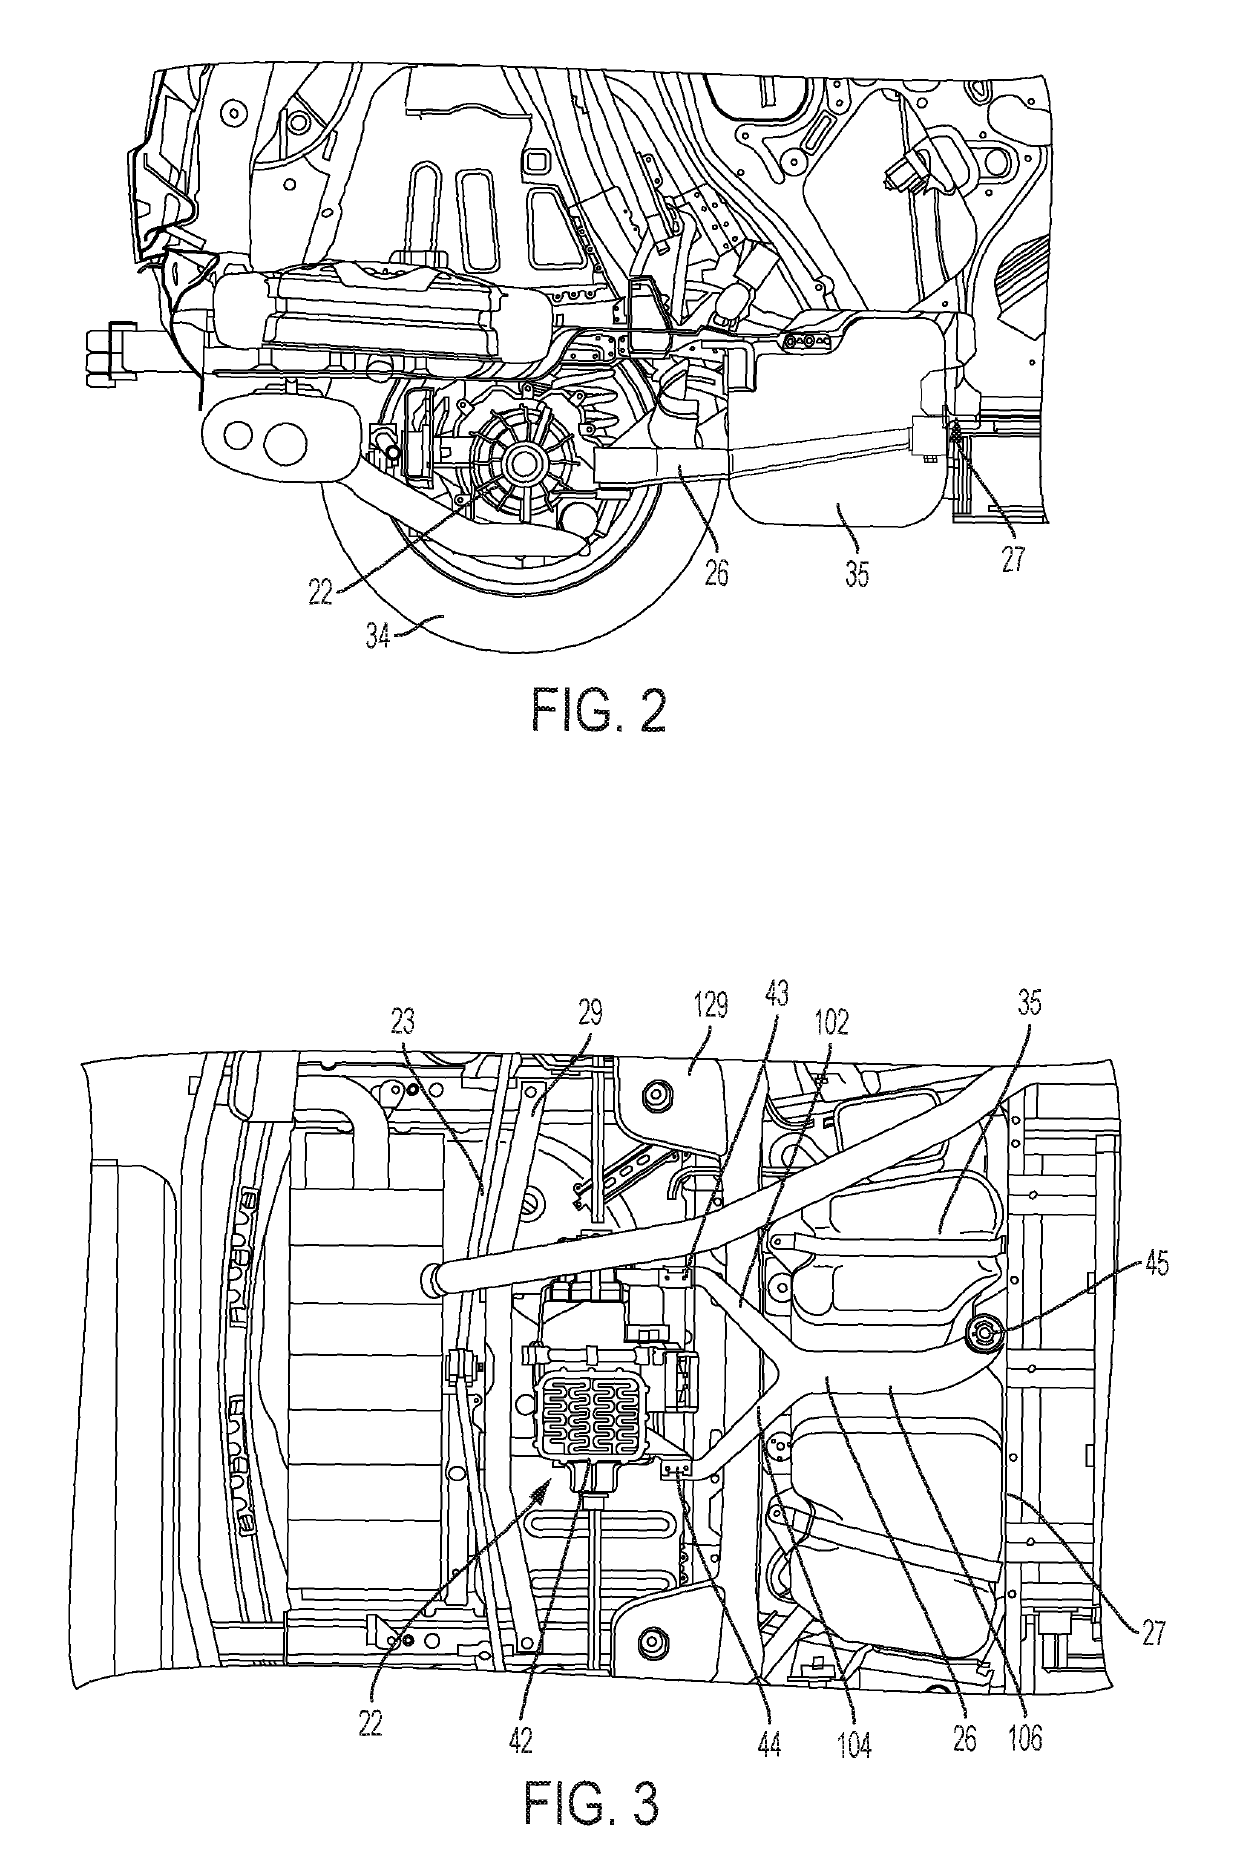 Torque reaction frame for mitigation of rear impact effects